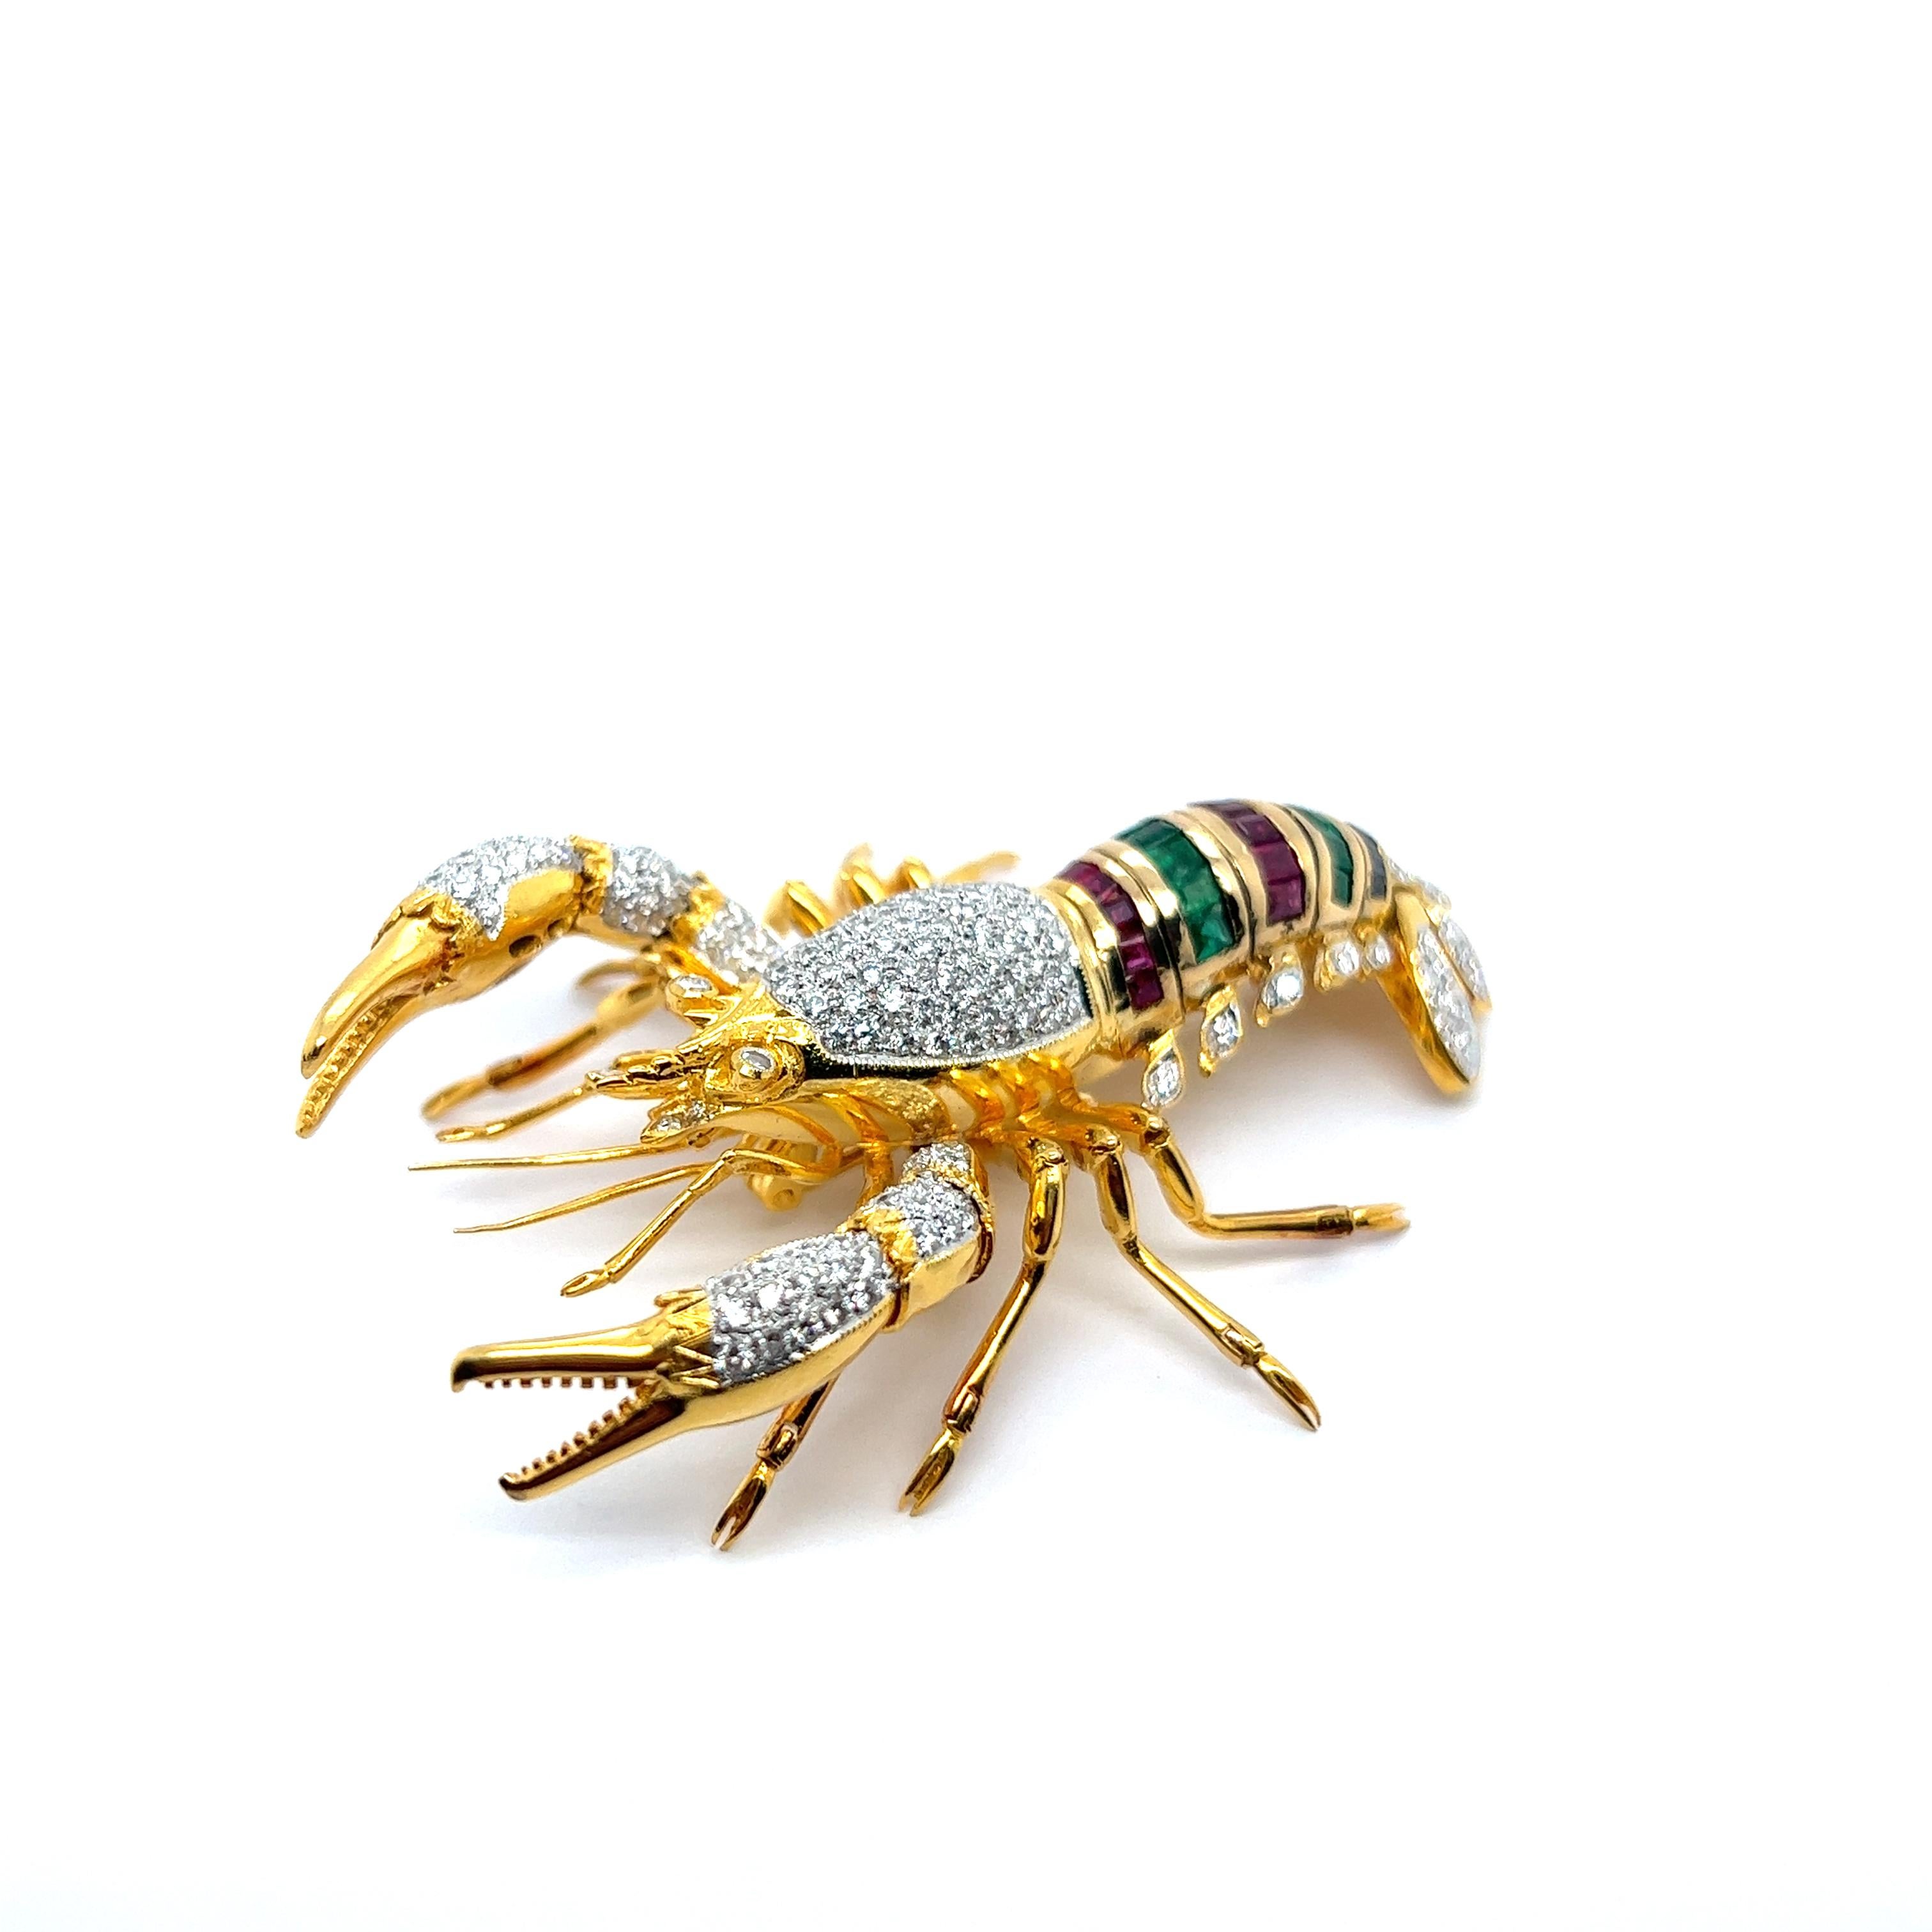 Mixed Cut Lobster Brooch with Diamonds Rubies Emeralds & Sapphires in 18 Karat Yellow Gold